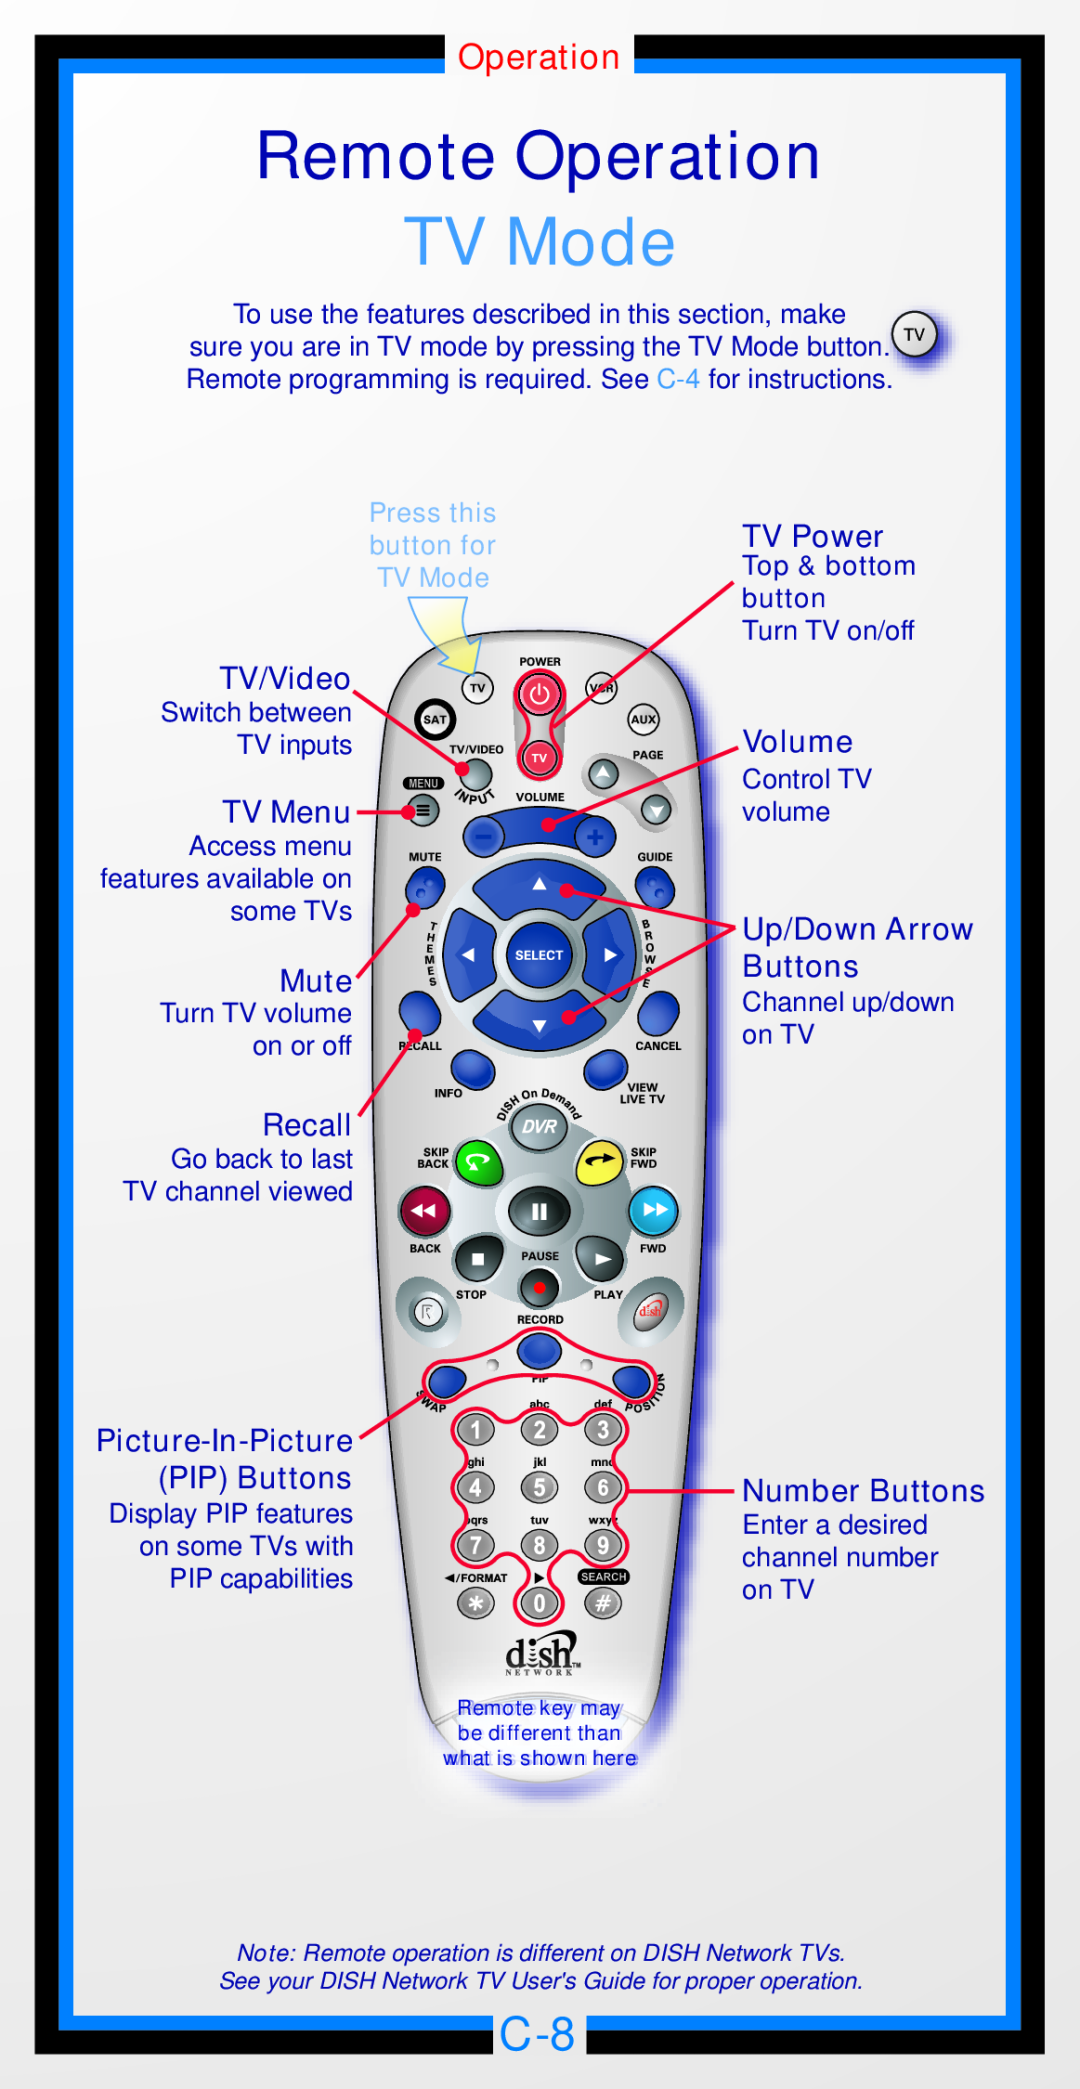 Dish Network 6.3 TV Mode, Remote Operation, Up/Down Arrow, Picture-In-Picture, Number Buttons, Press this, Top & bottom 